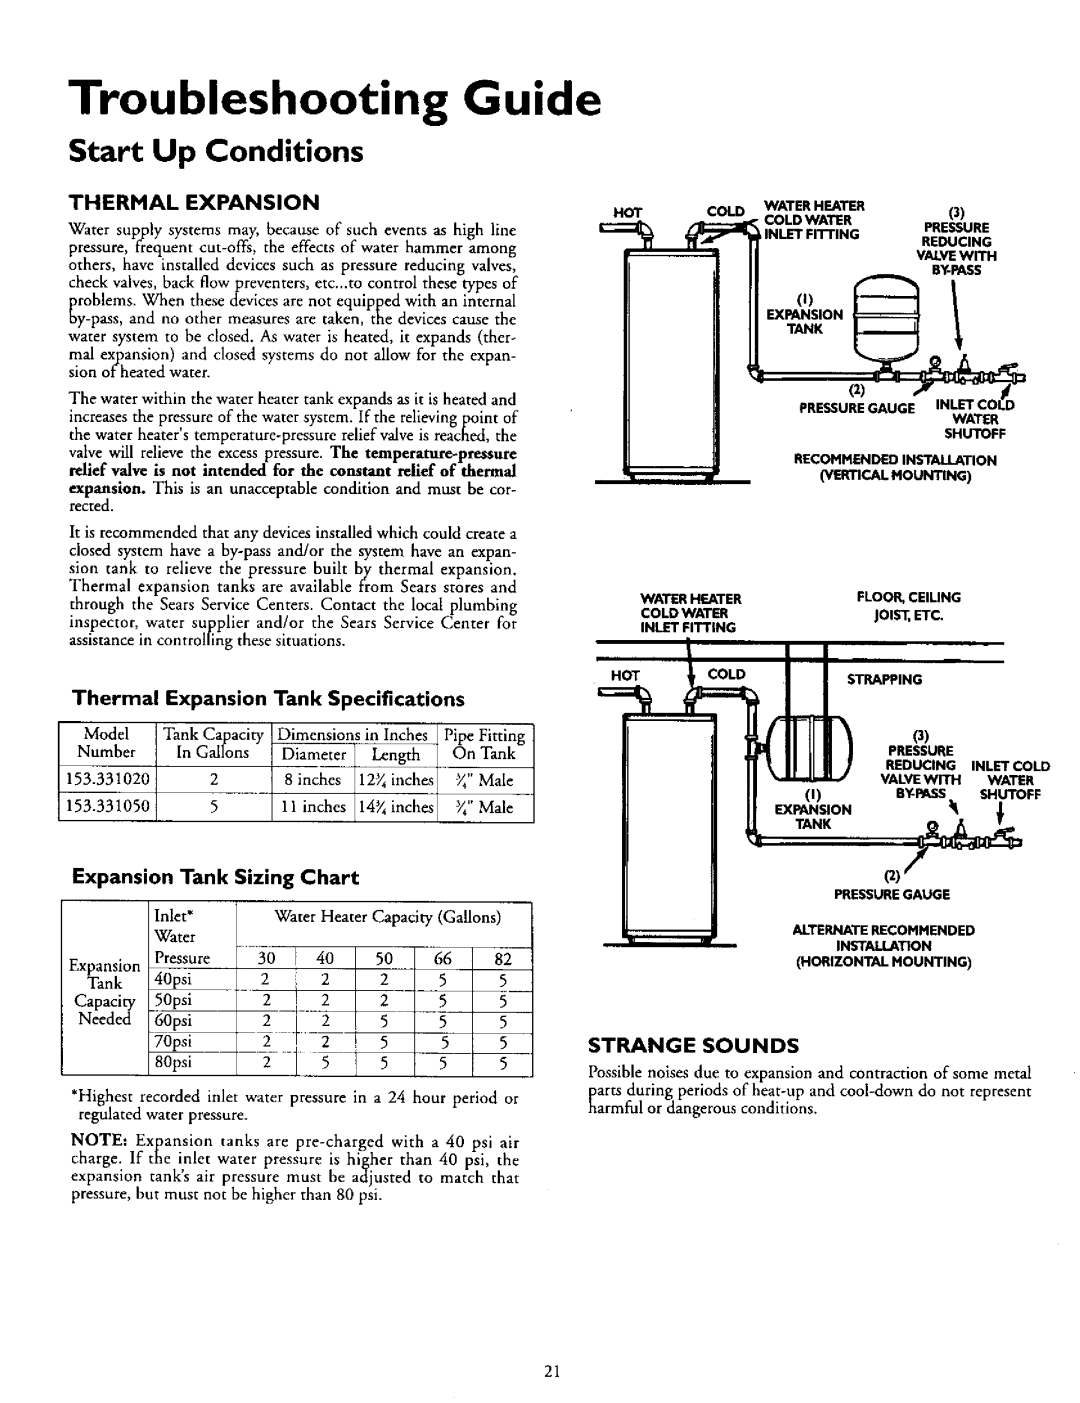 Kenmore 153.327563 Troubleshooting Guide, Start Up Conditions, Thermal Expansion Tank Specifications, Sizing, Chart 